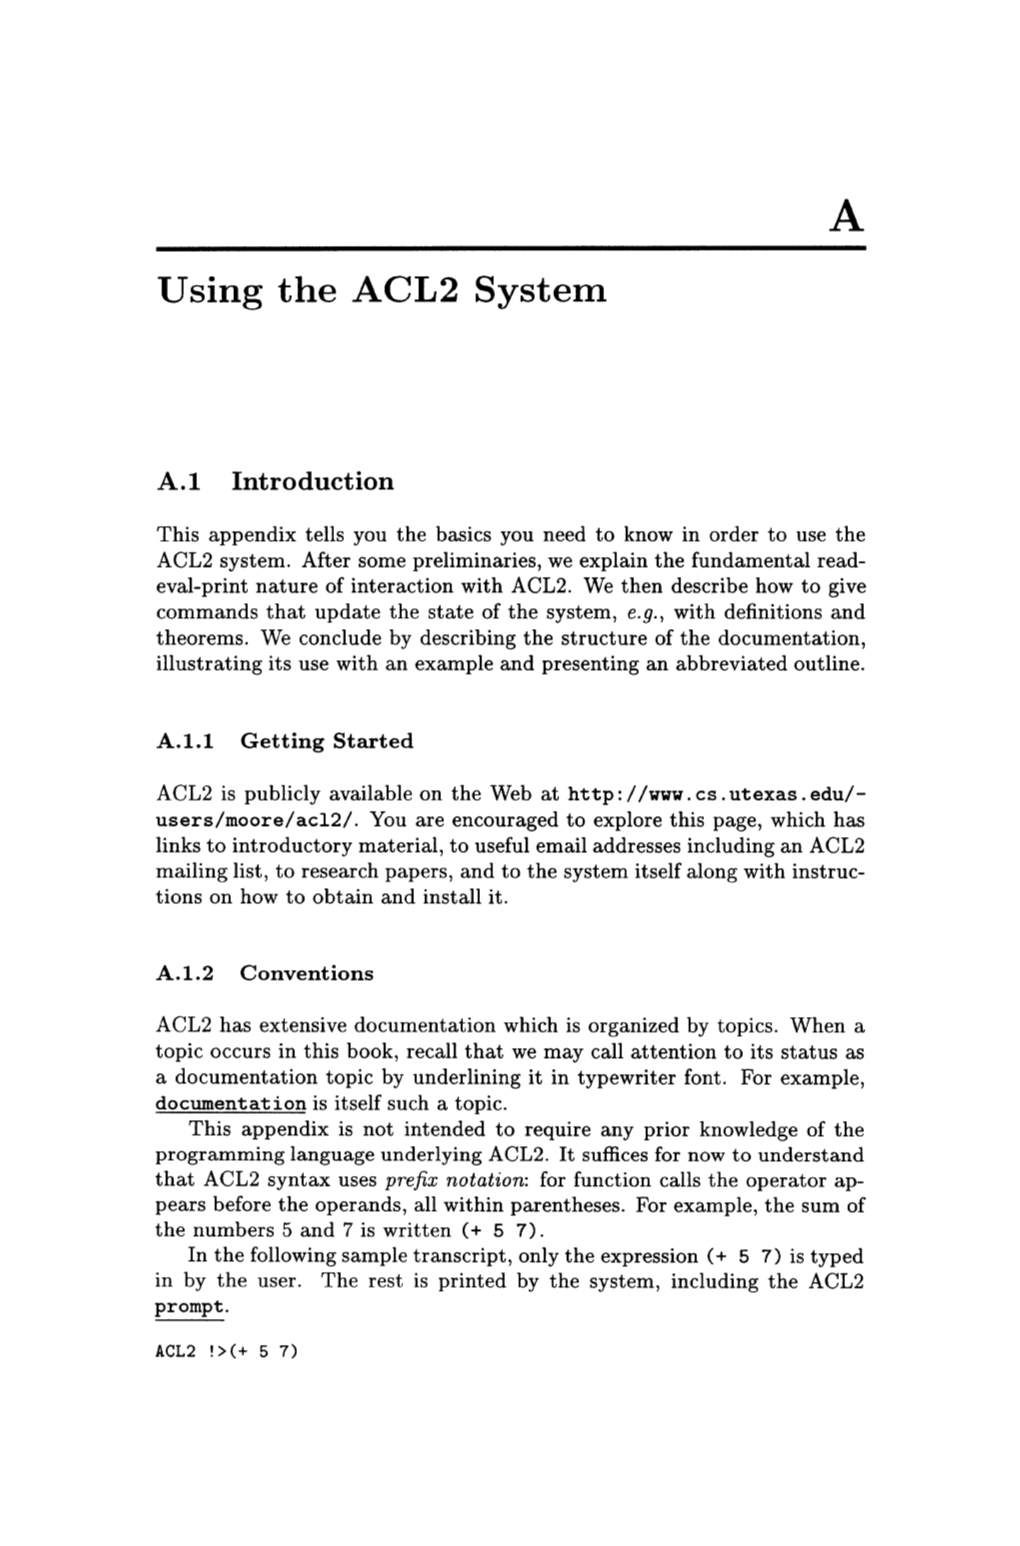 Using the ACL2 System